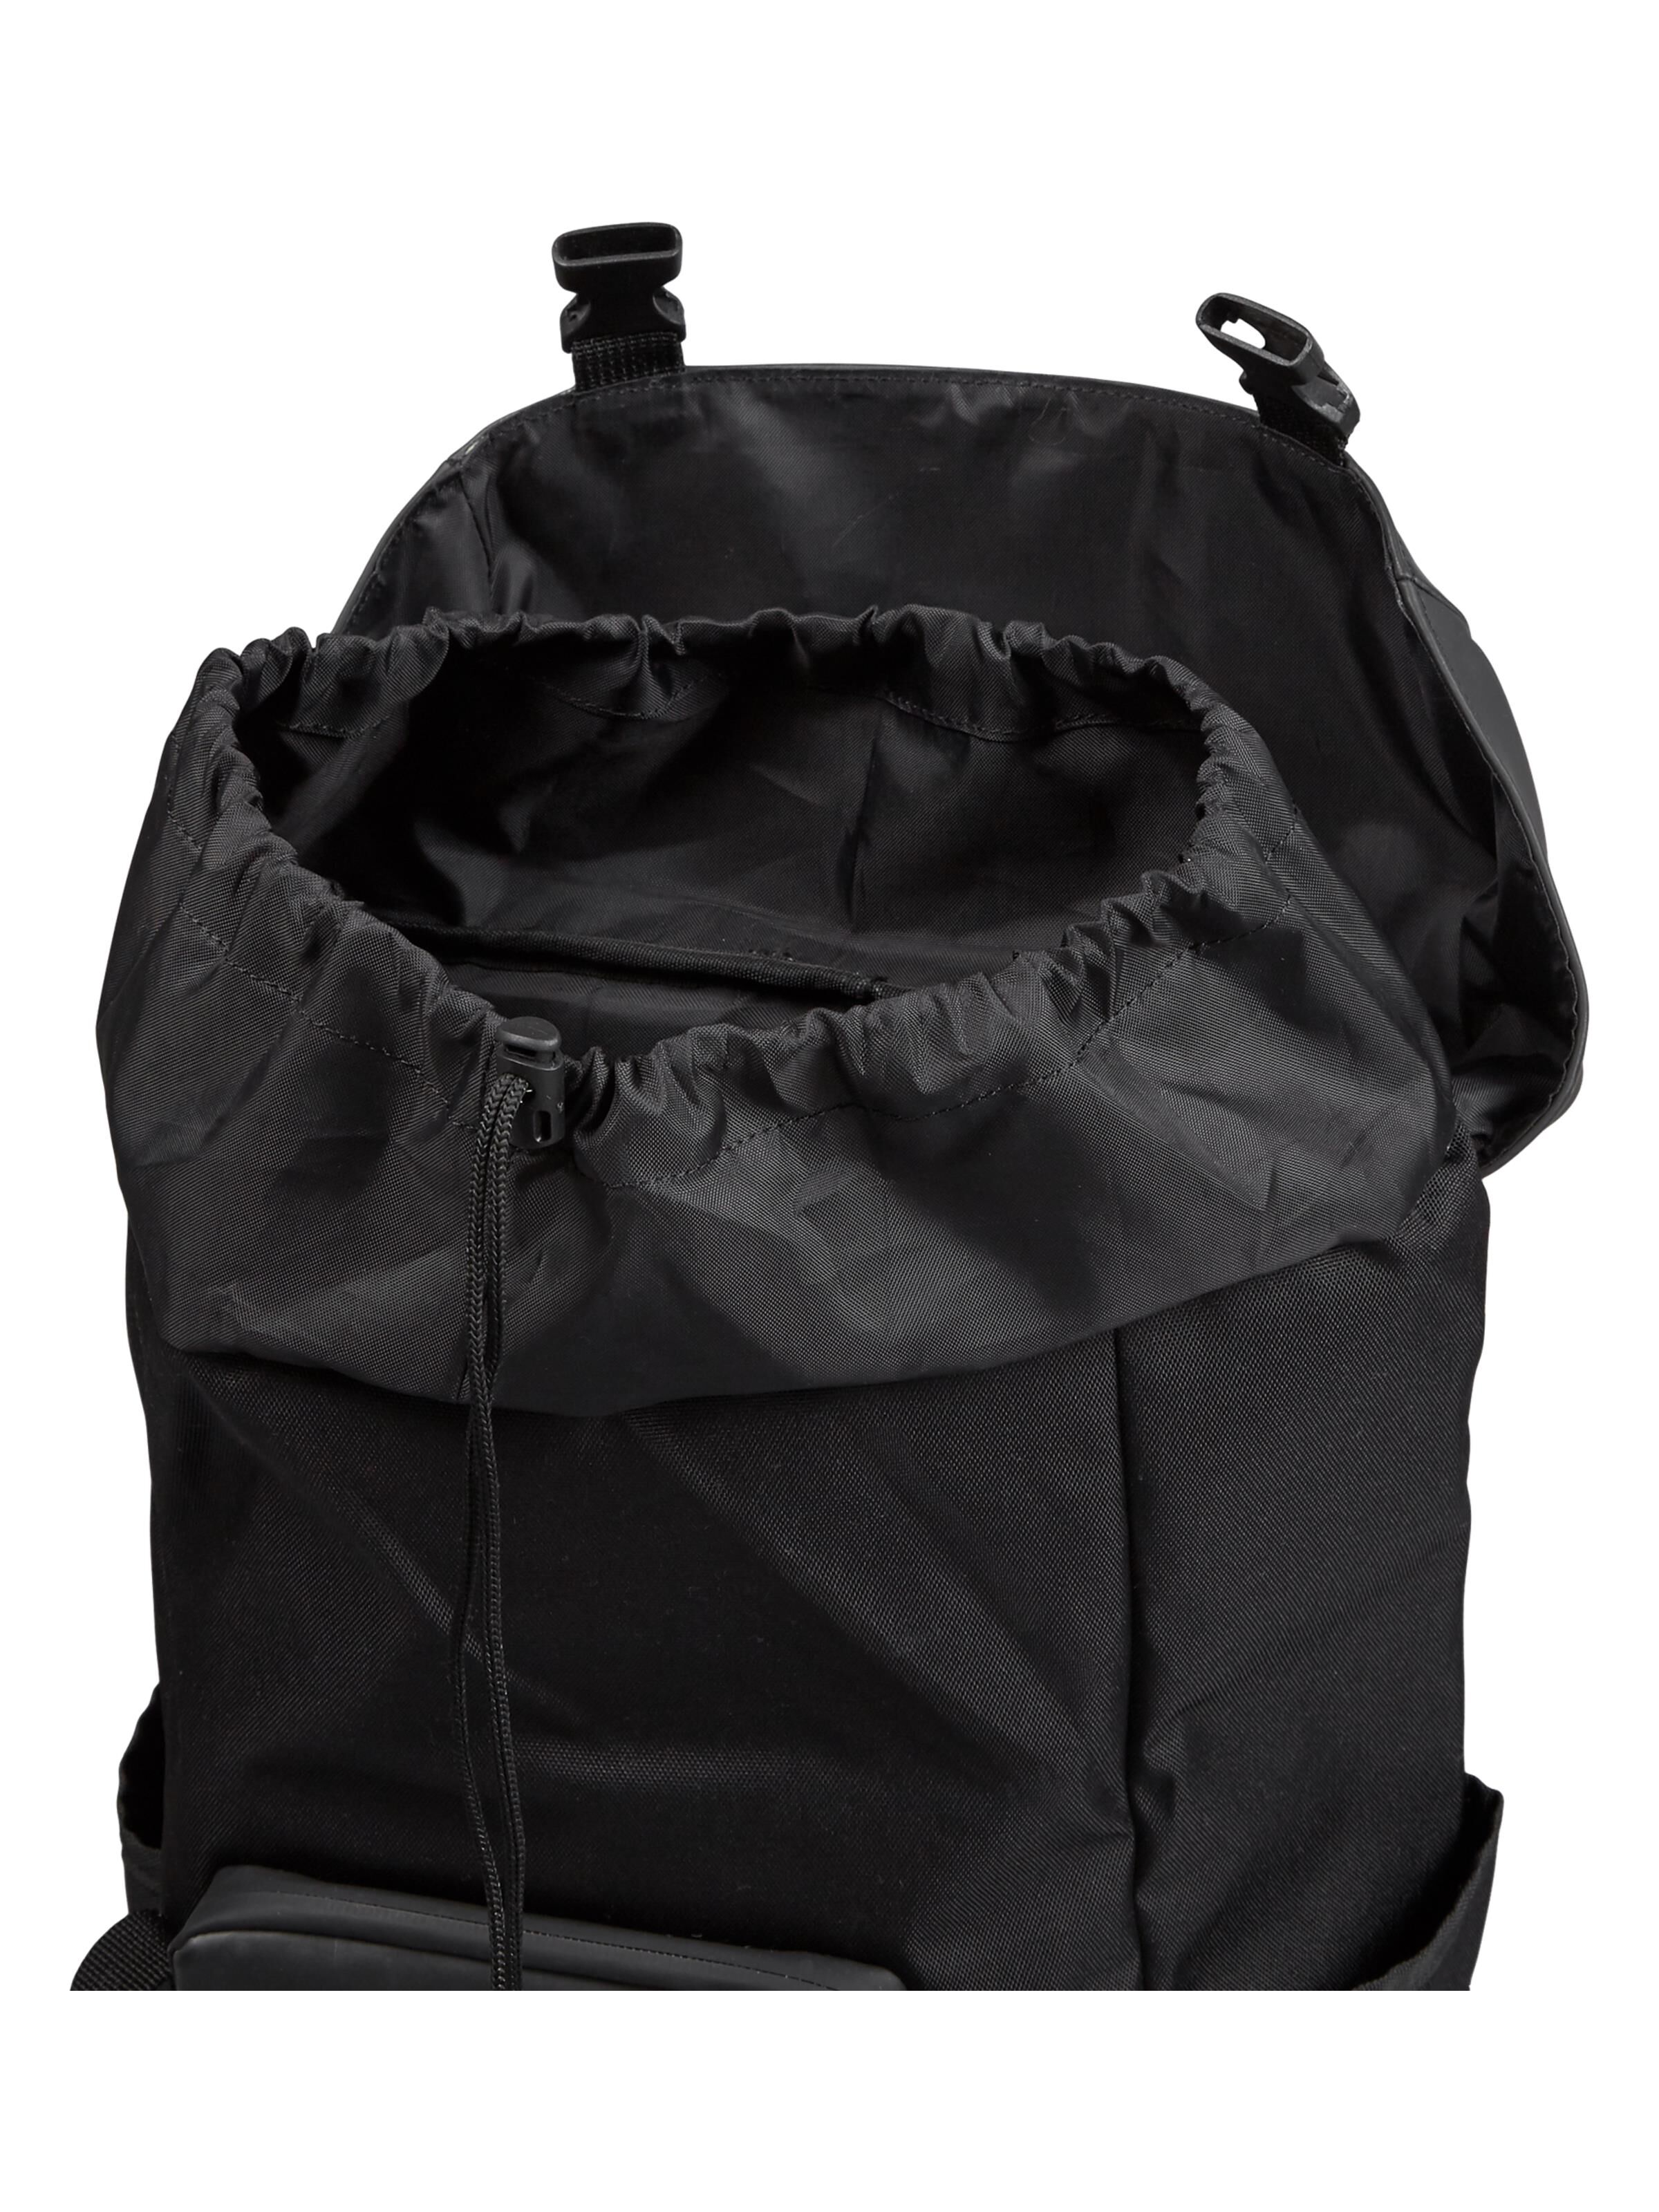 DONNAY by CARLO COLUCCI Rucksack